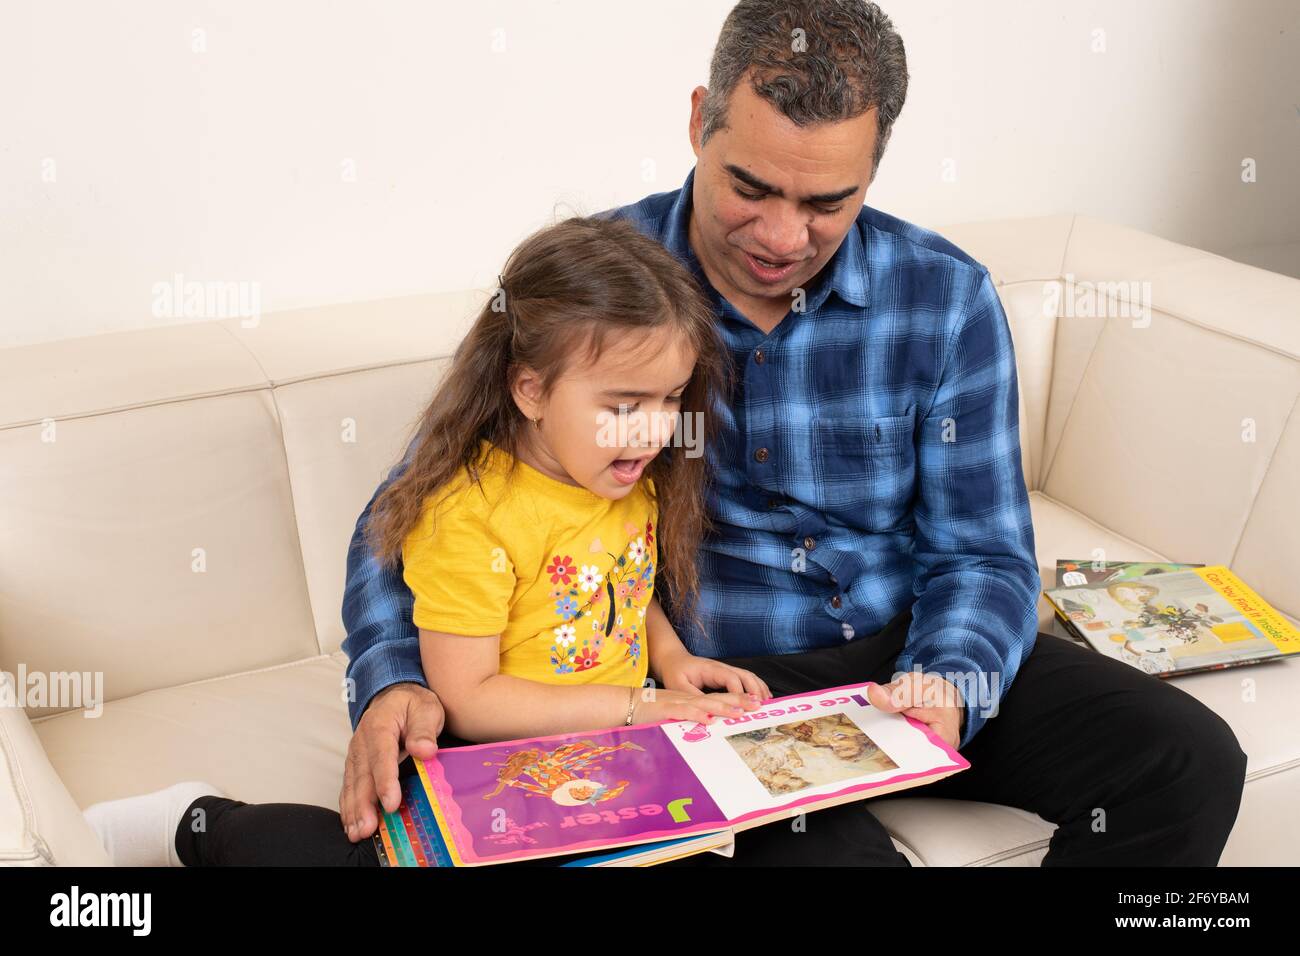 Four year old girl looking at picture book with grandfather Stock Photo